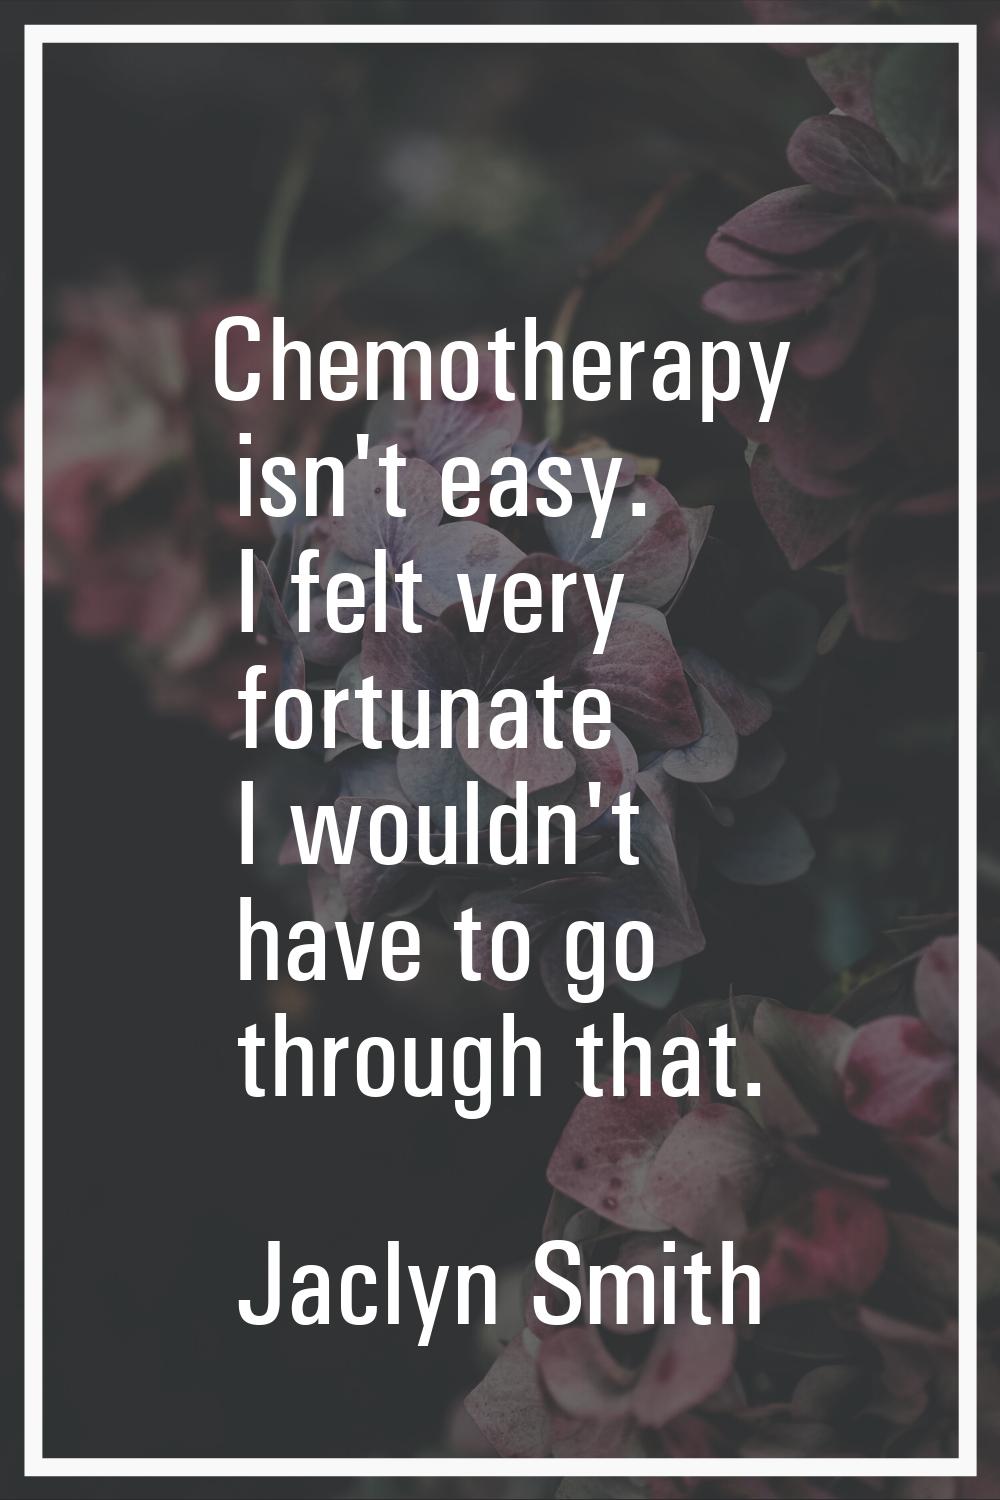 Chemotherapy isn't easy. I felt very fortunate I wouldn't have to go through that.